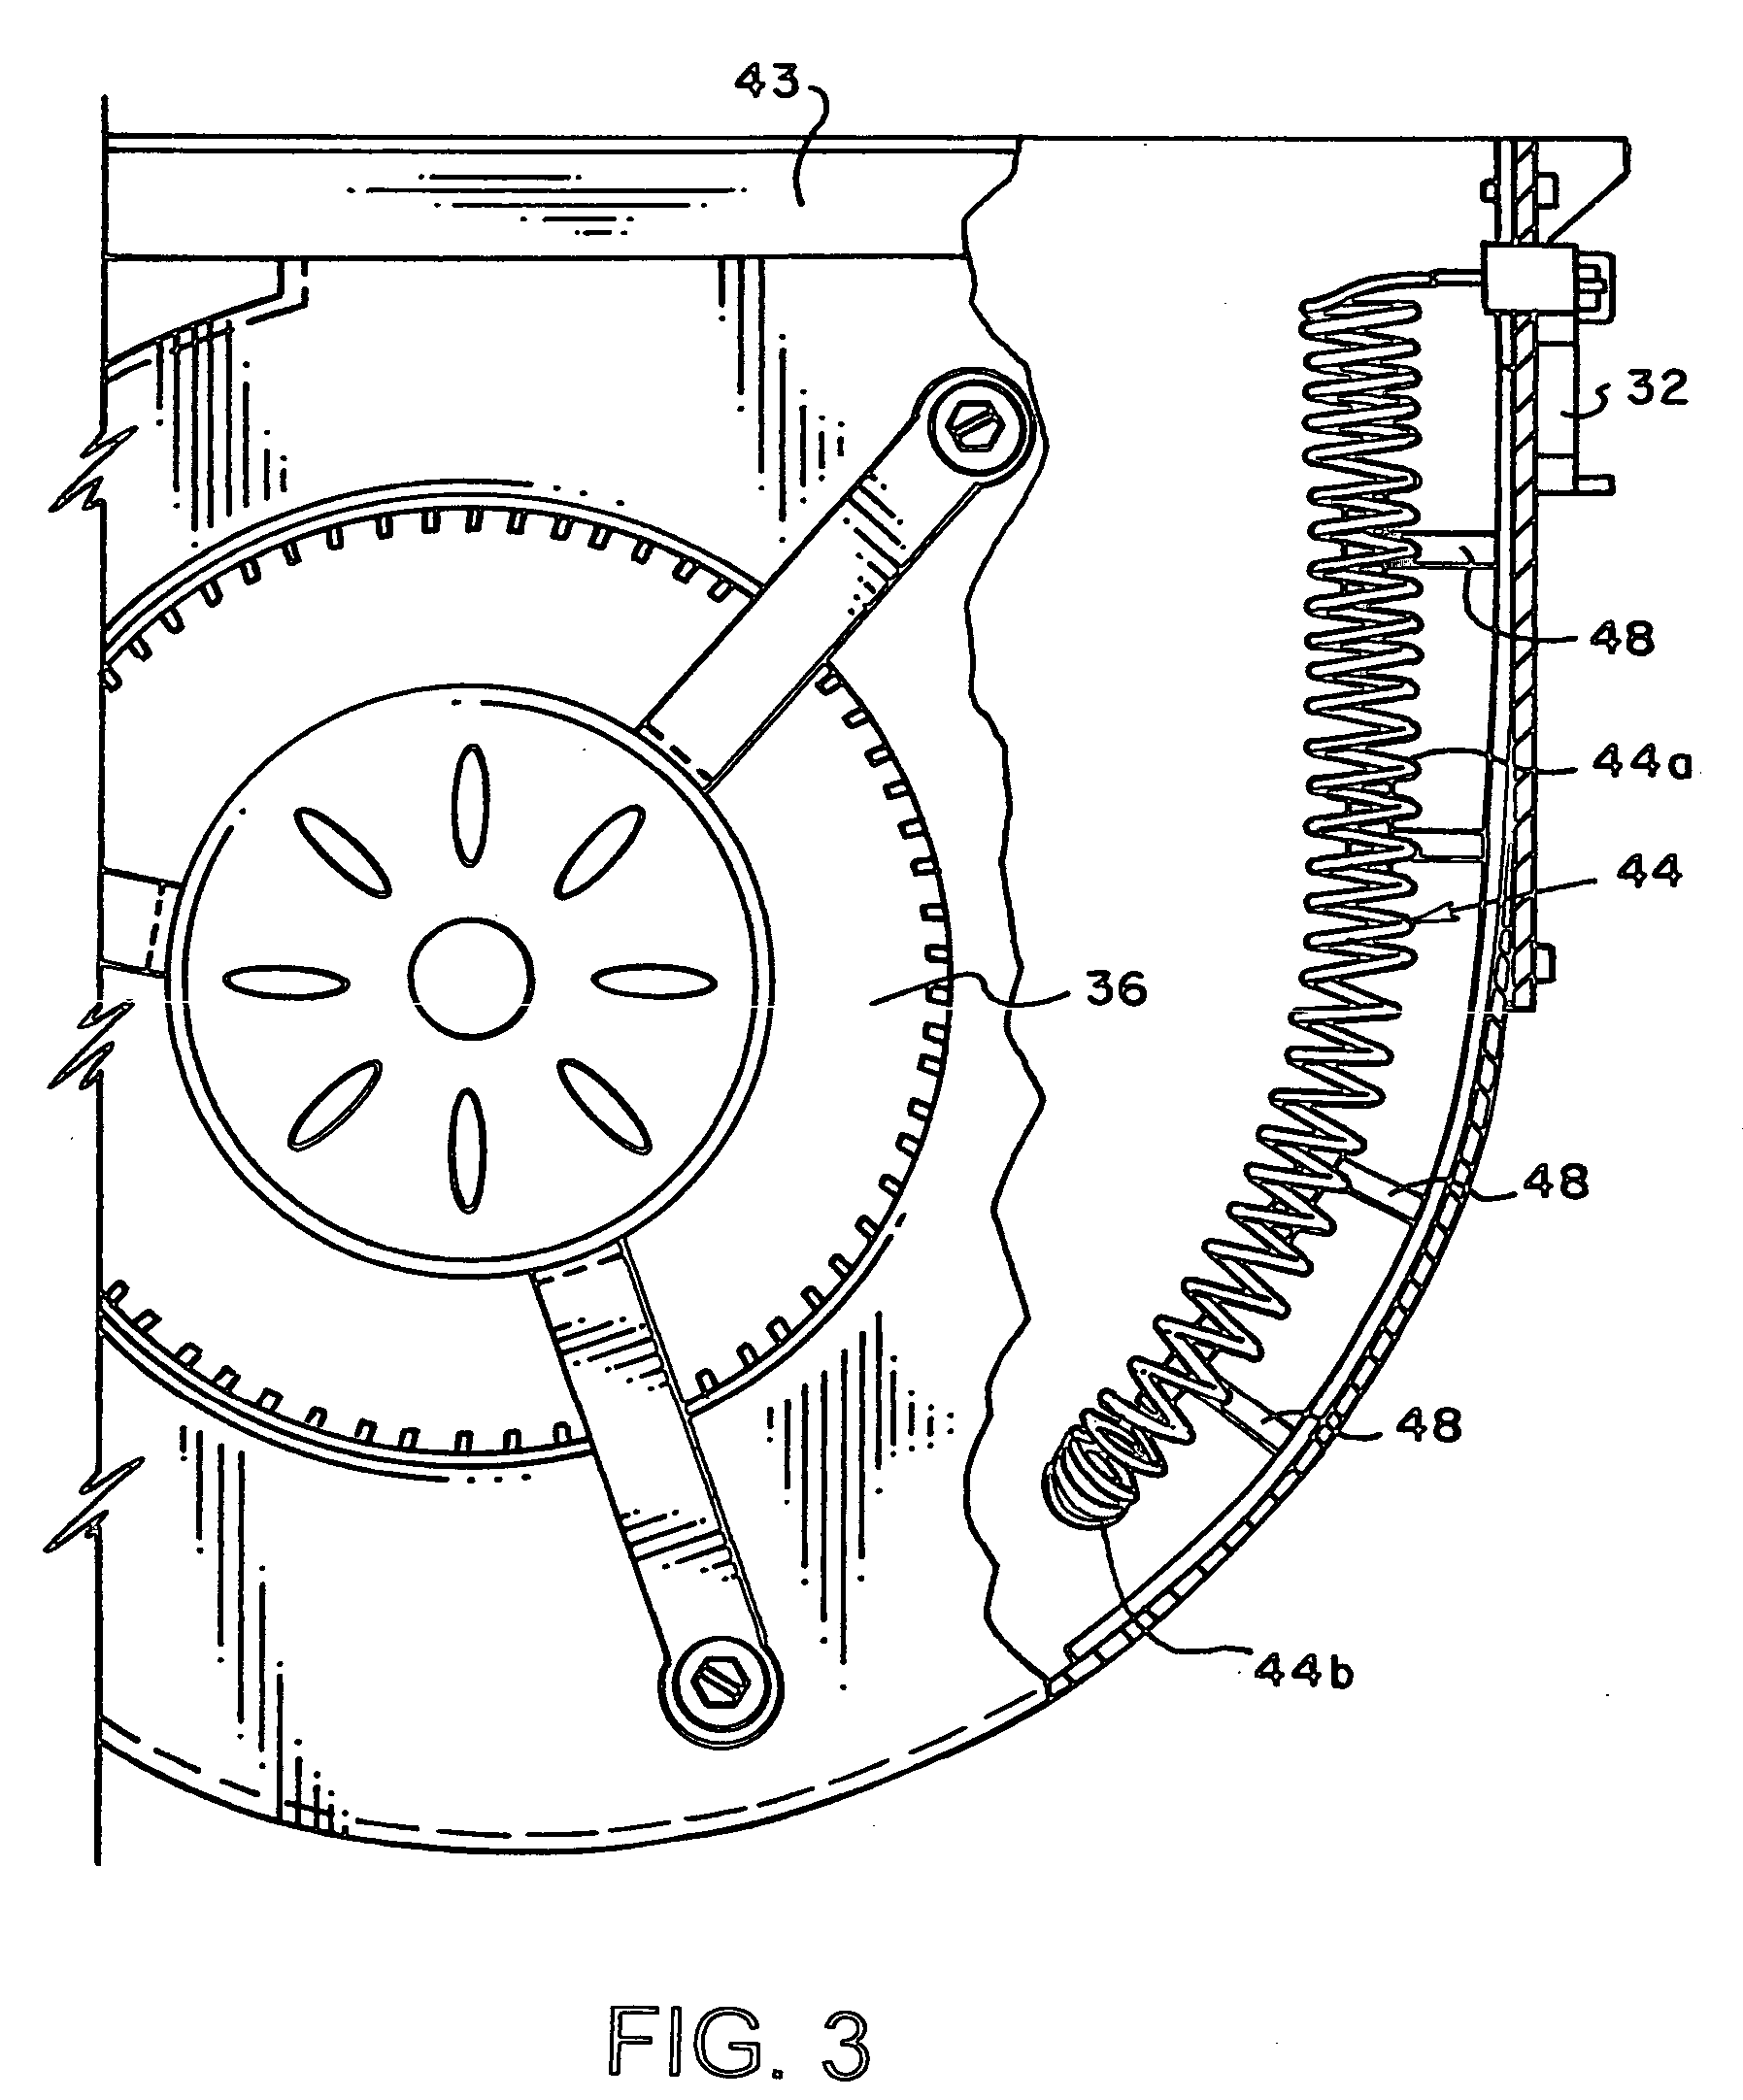 Air conditioning apparatus with blower and electric heater in common housing